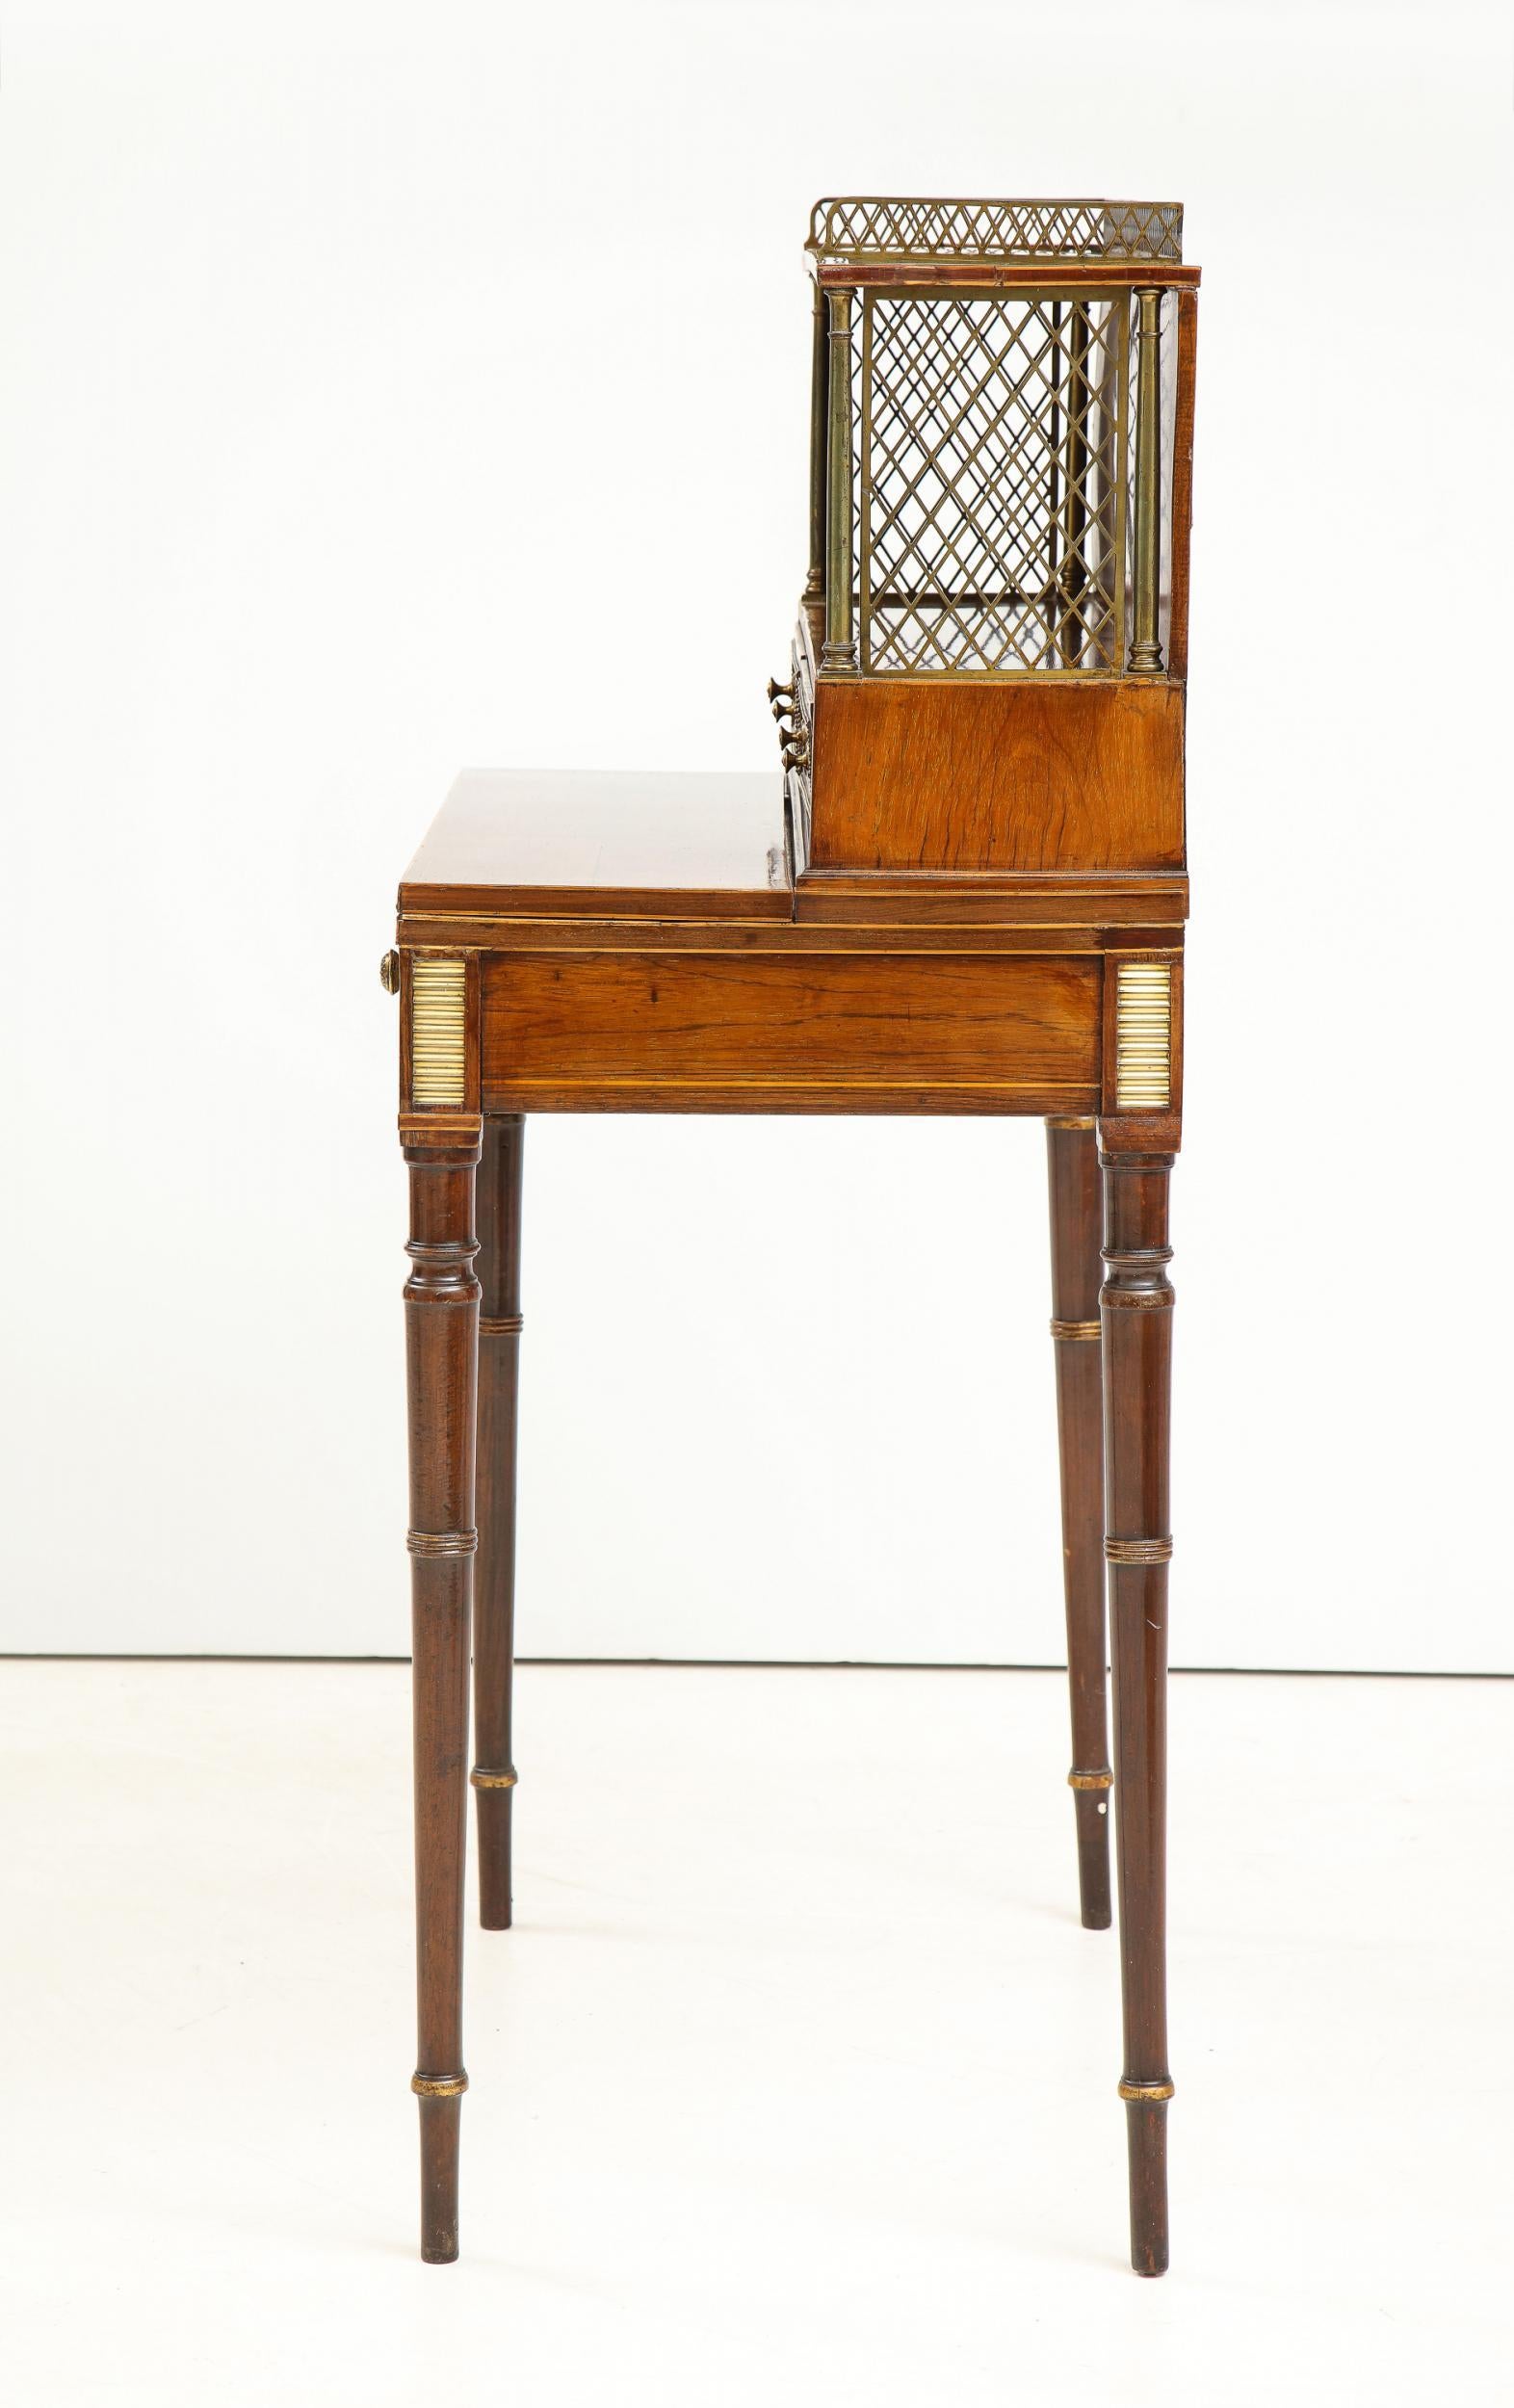 19th Century Regency Diminutive Writing Table For Sale